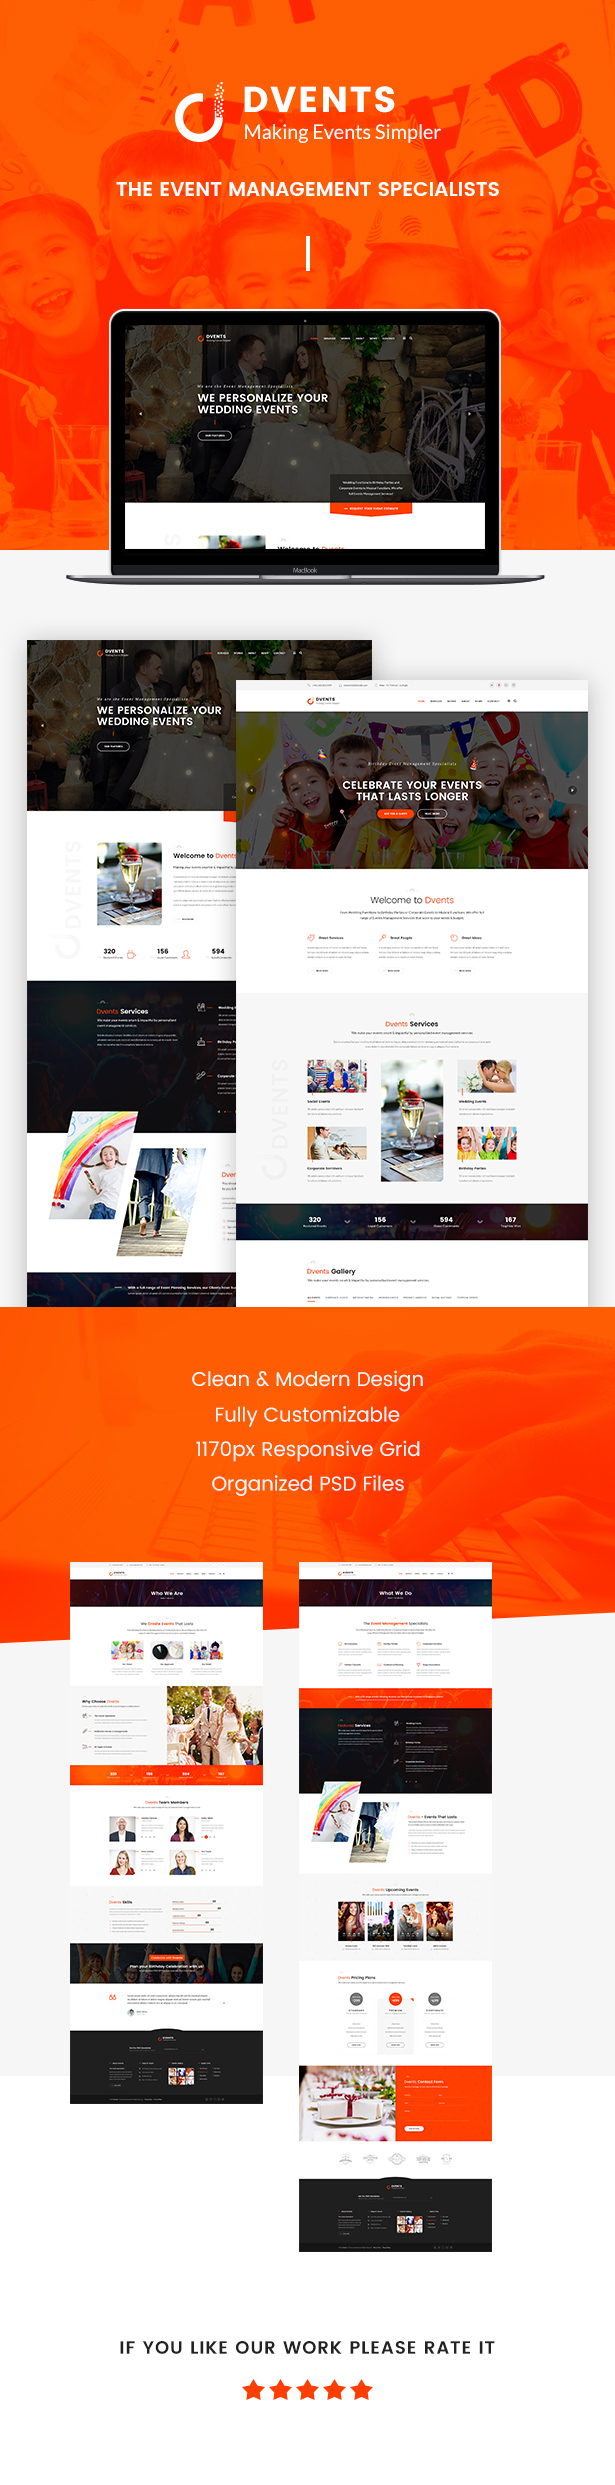 Dvents - HTML Template - 2